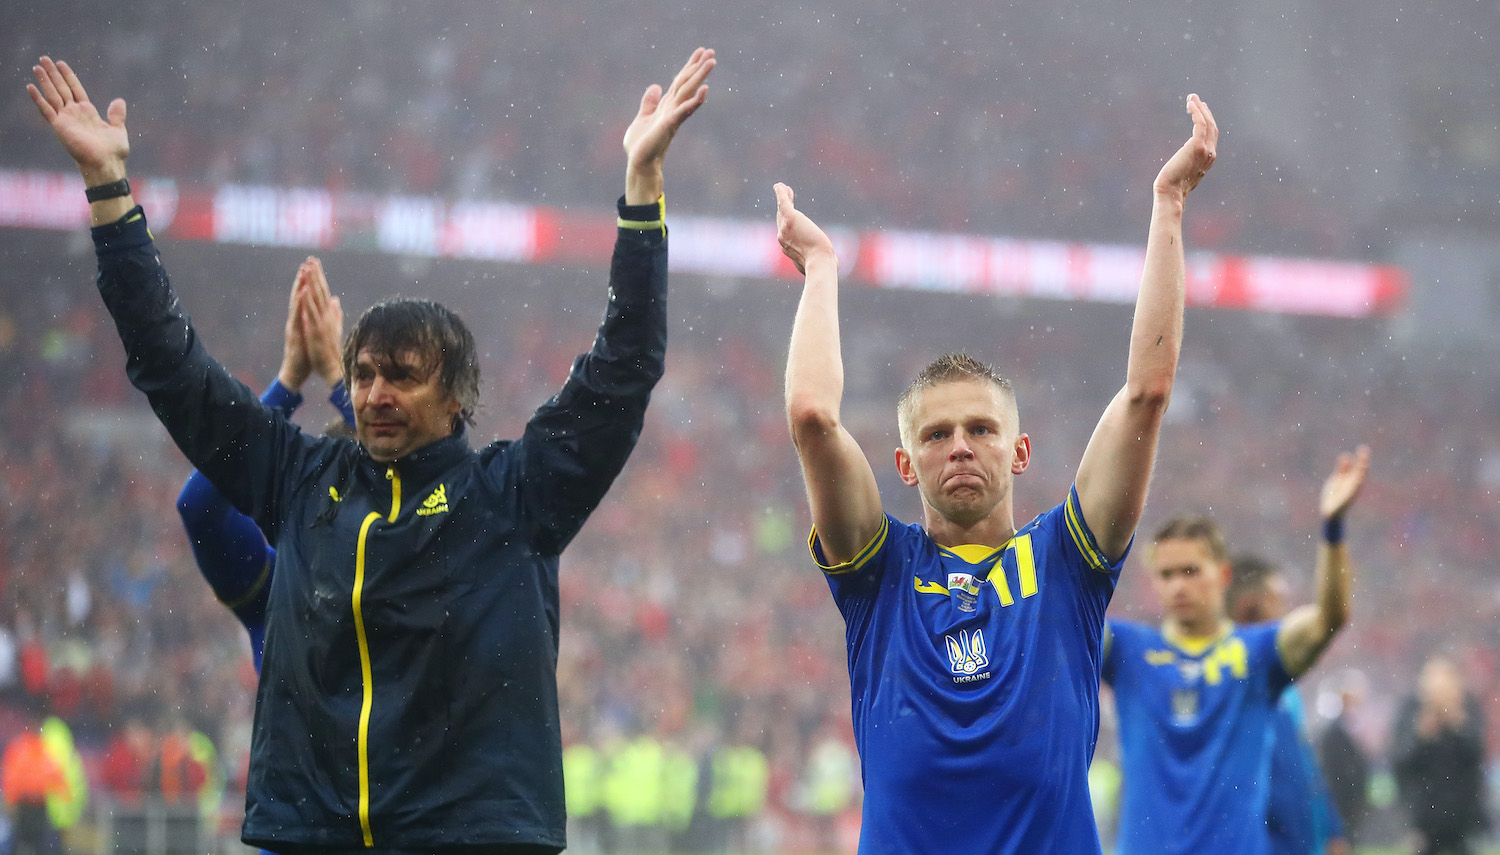 CARDIFF, WALES - JUNE 05: Oleksandr Zinchenko of Ukraine applauds the fans after their sides defeat during the FIFA World Cup Qualifier between Wales and Ukraine at Cardiff City Stadium on June 05, 2022 in Cardiff, Wales. (Photo by Michael Steele/Getty Images)